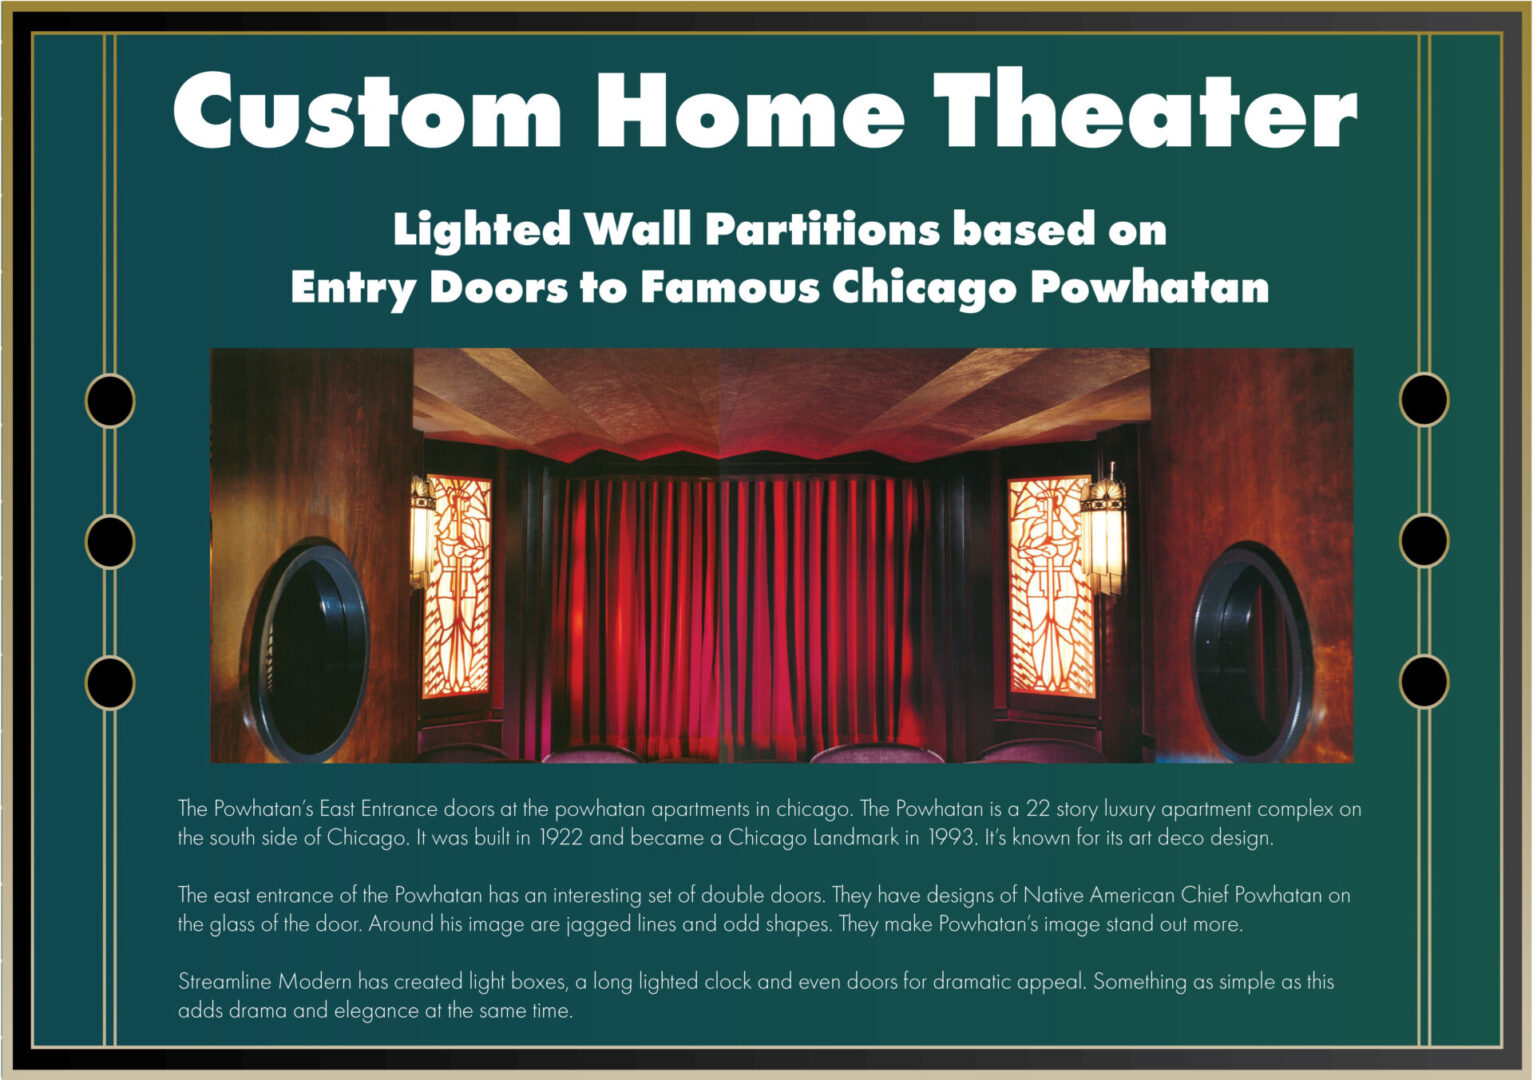 A Custom Home Theater with lighted wall partitions